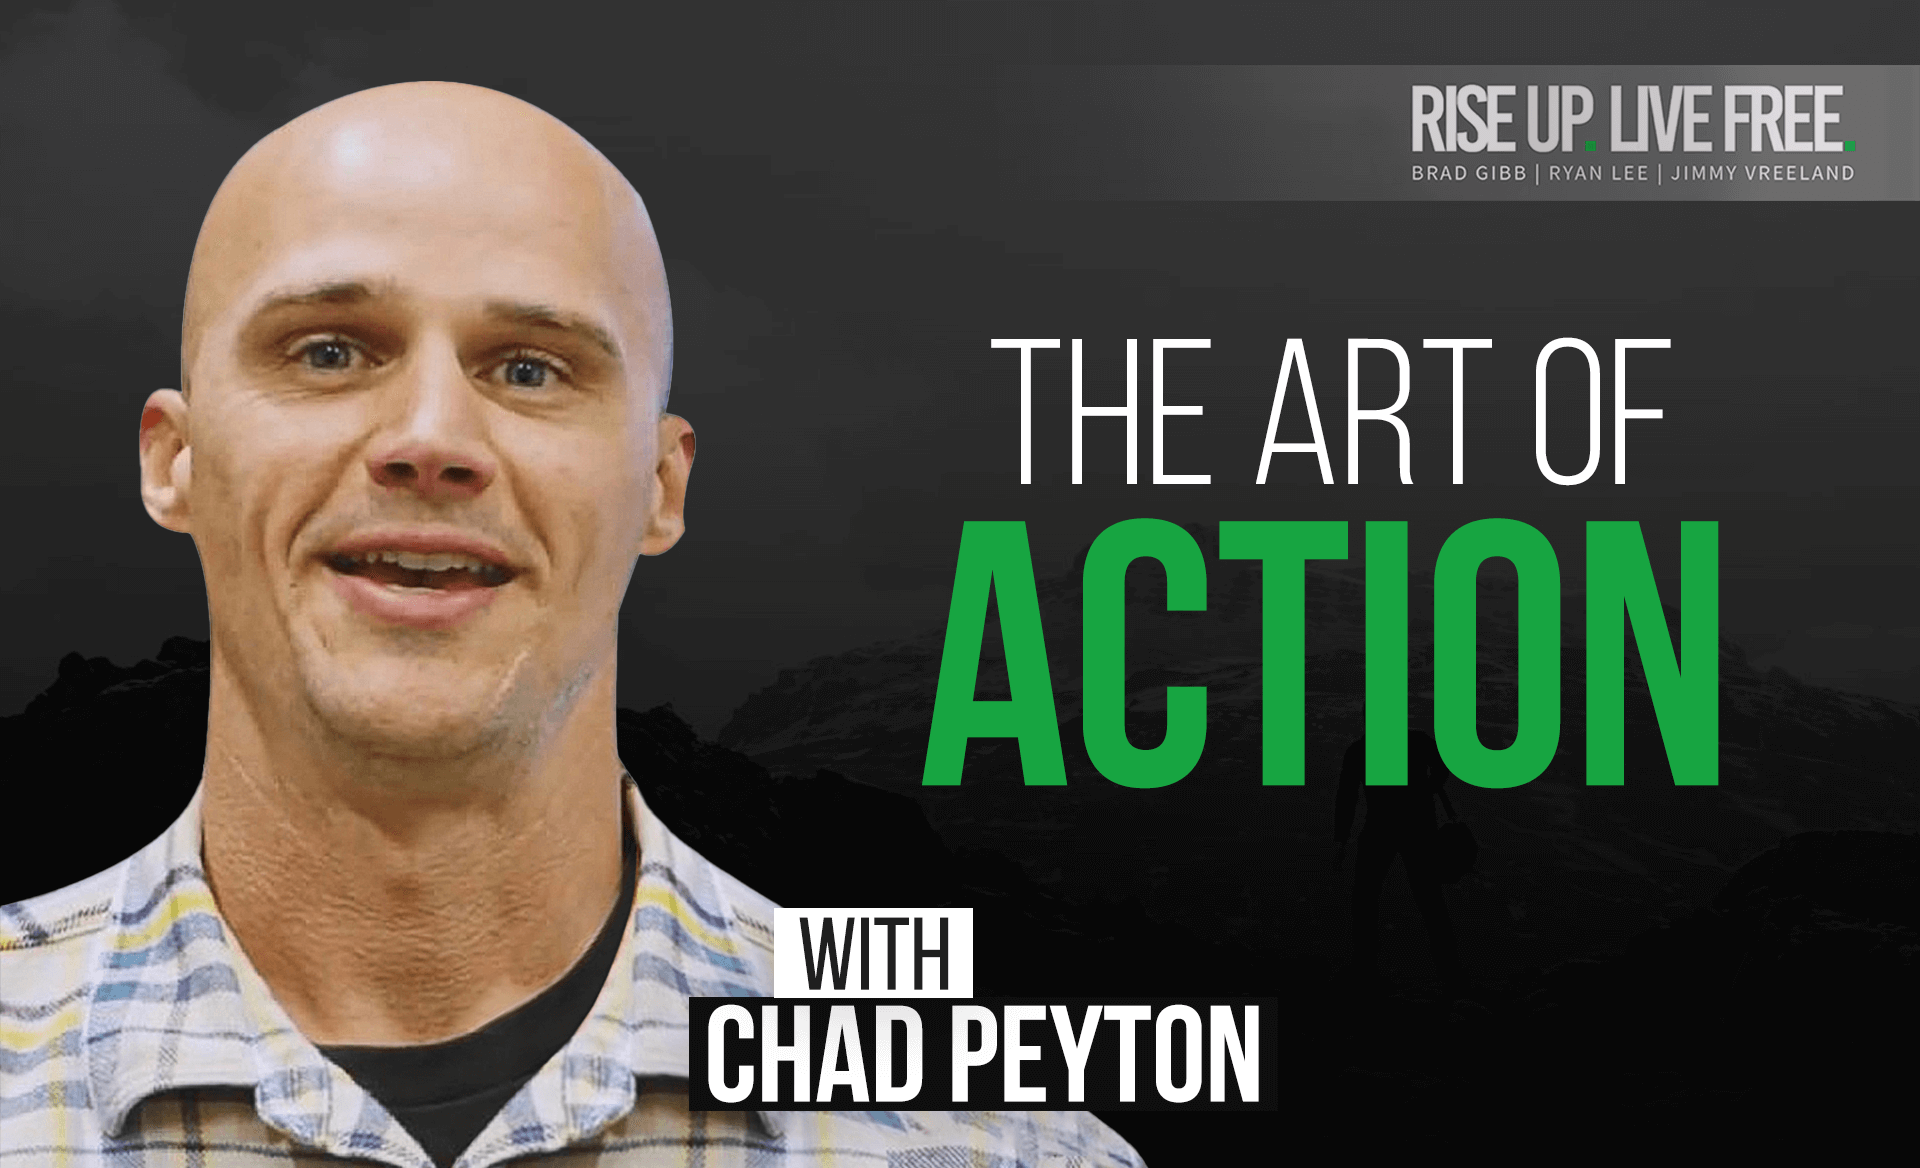 The art of action with Chad Peyton